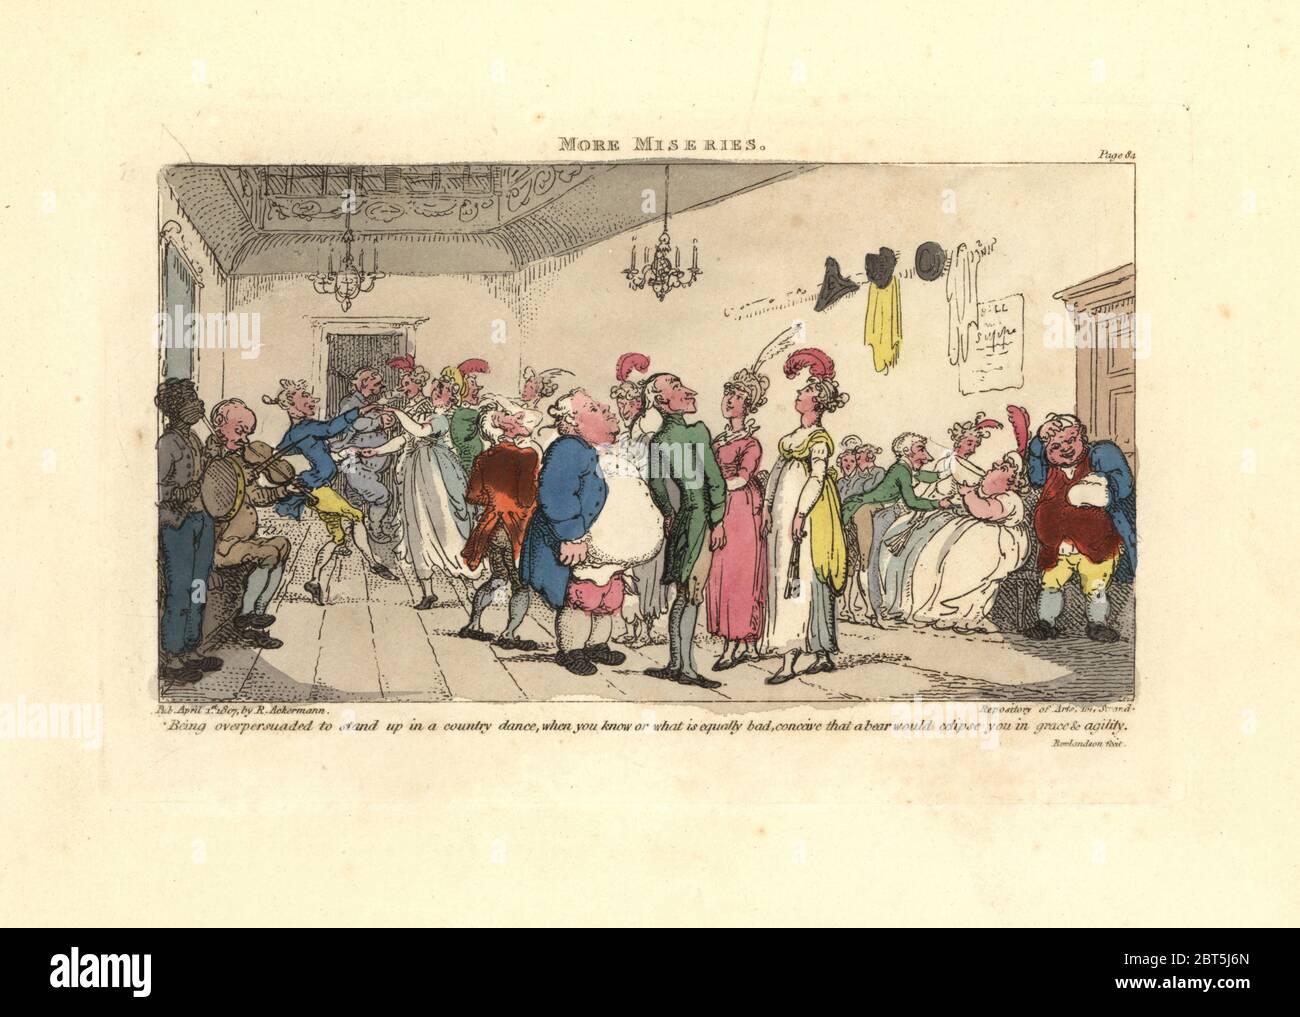 Man embarrassed at being made to dance at a country dance. More Miseries. Handcoloured copperplate engraving designed and etched by Thomas Rowlandson to accompany Reverend James Beresfords Miseries of Human Life, Ackermann, 1808. Stock Photo